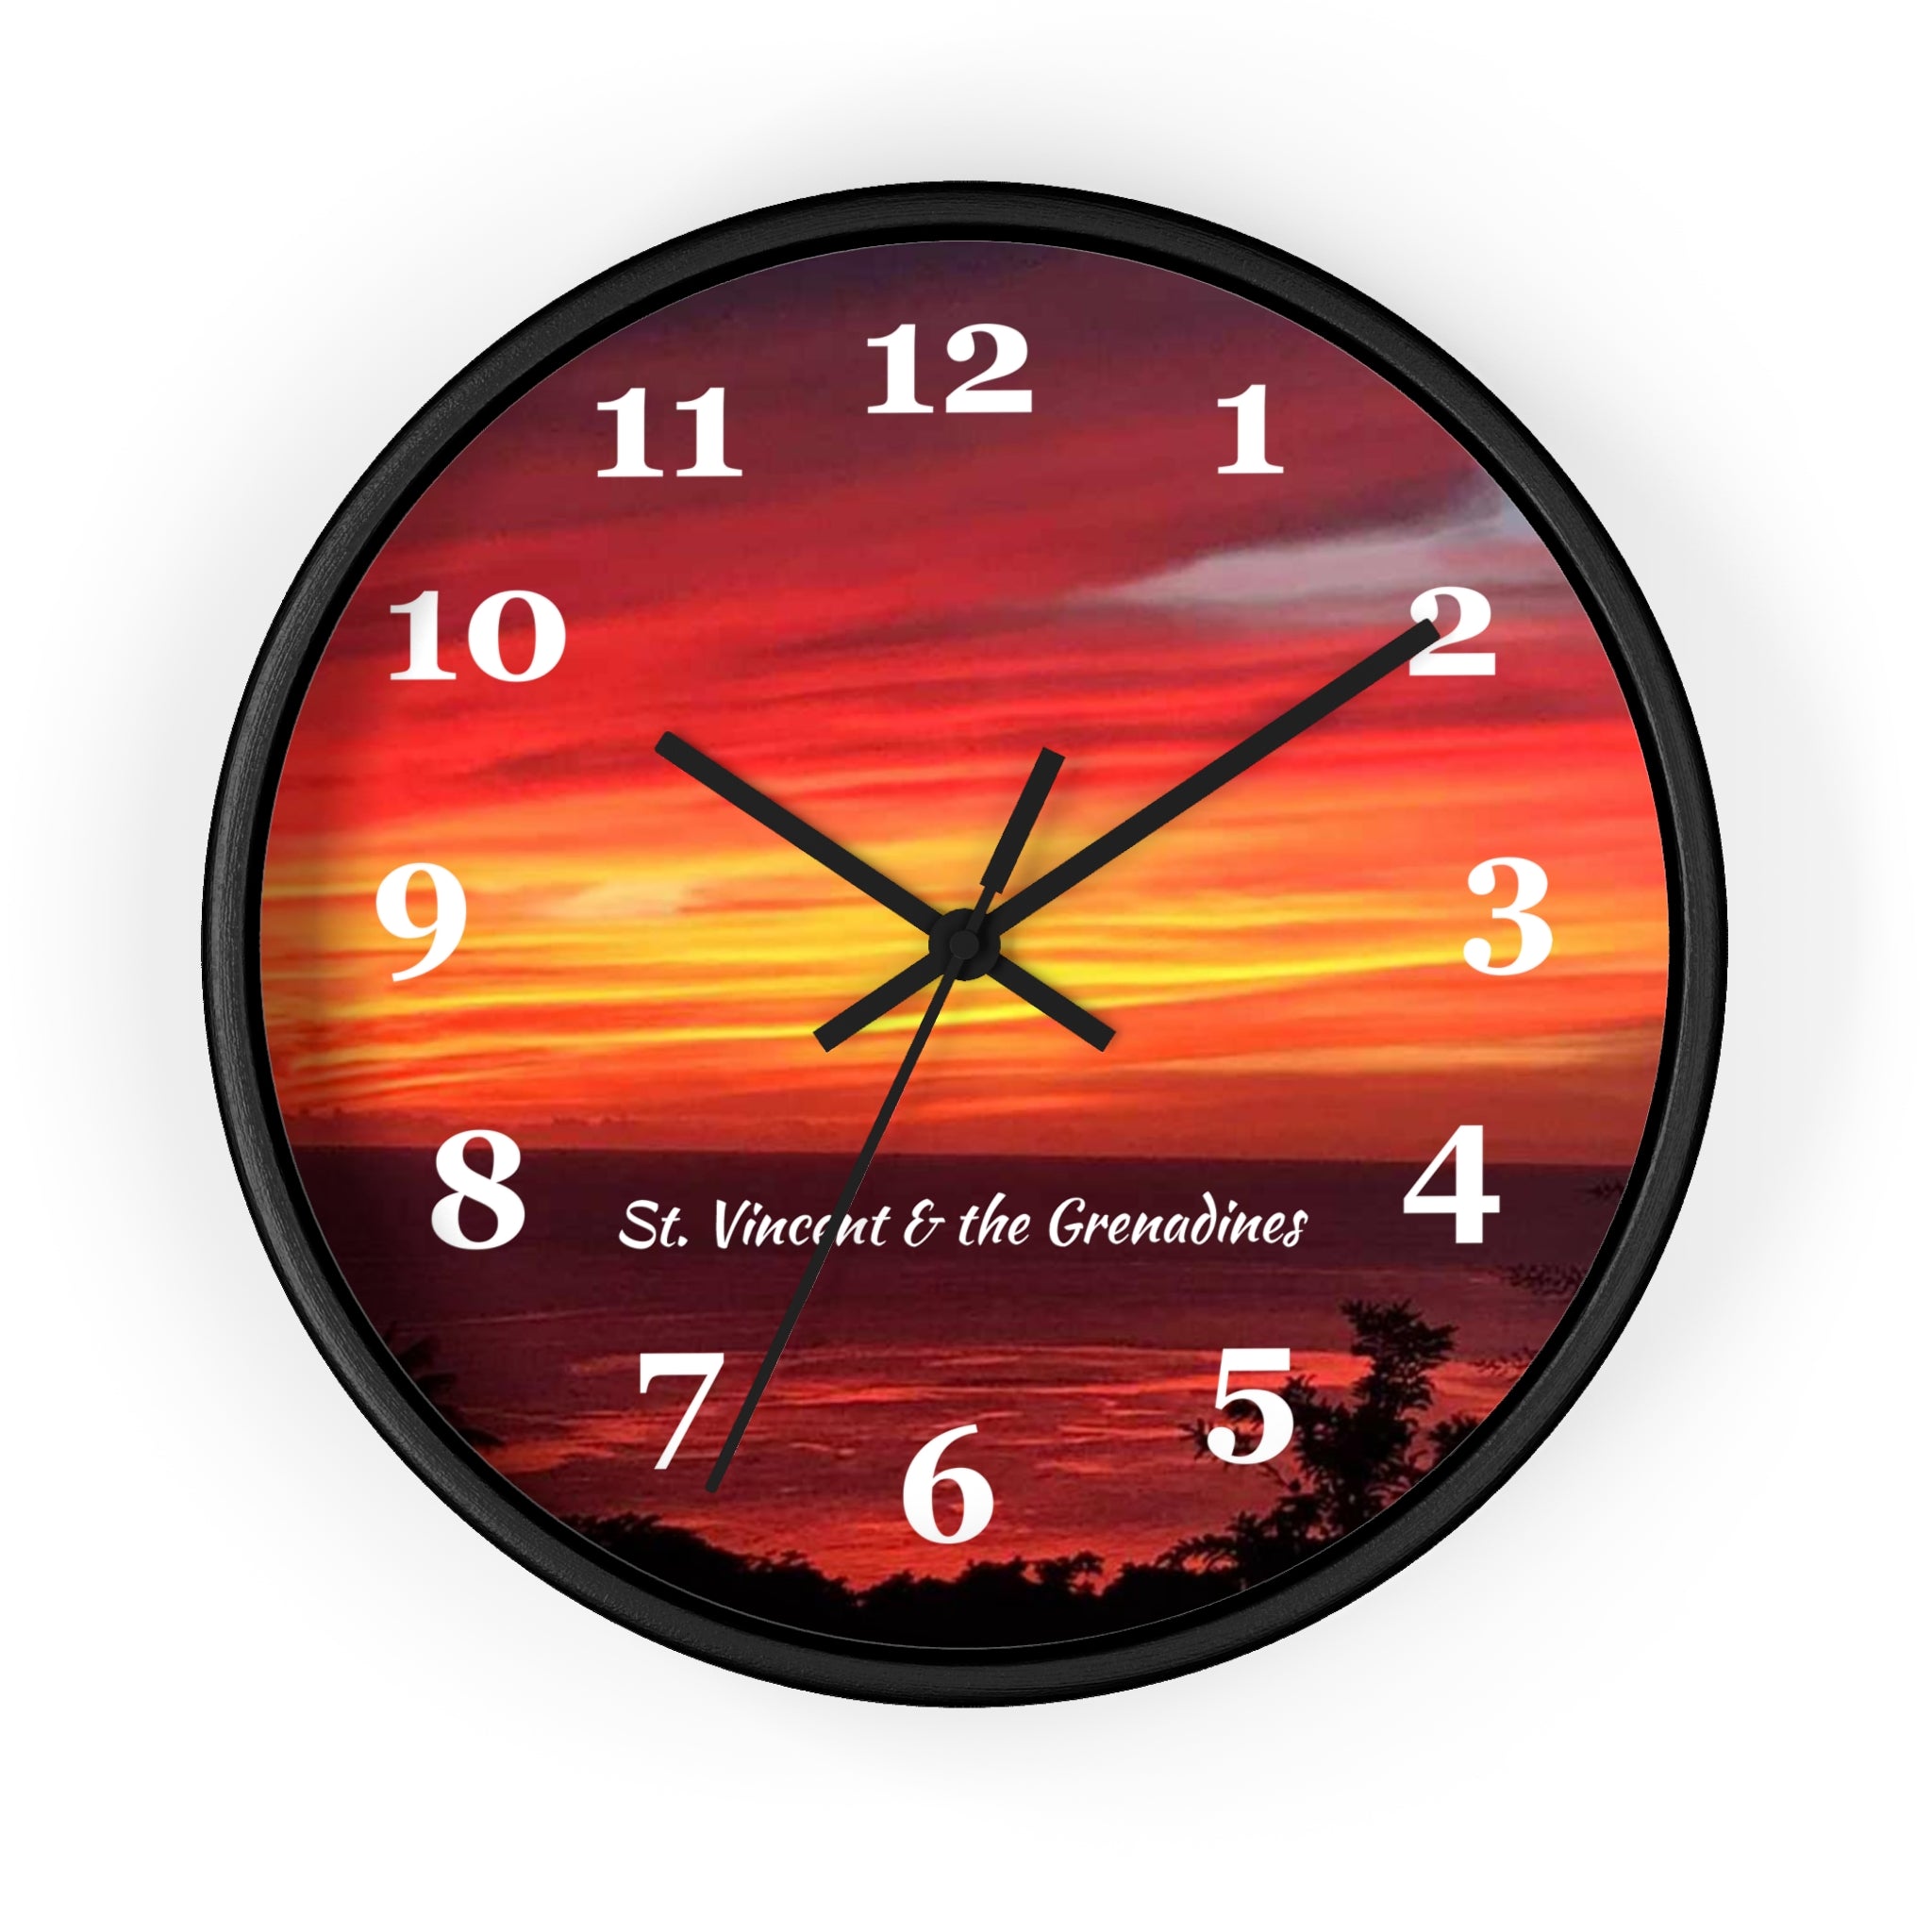 10 inch round wall clock showing a photo of a vibrant sunset in St. Vincent and the Grenadines